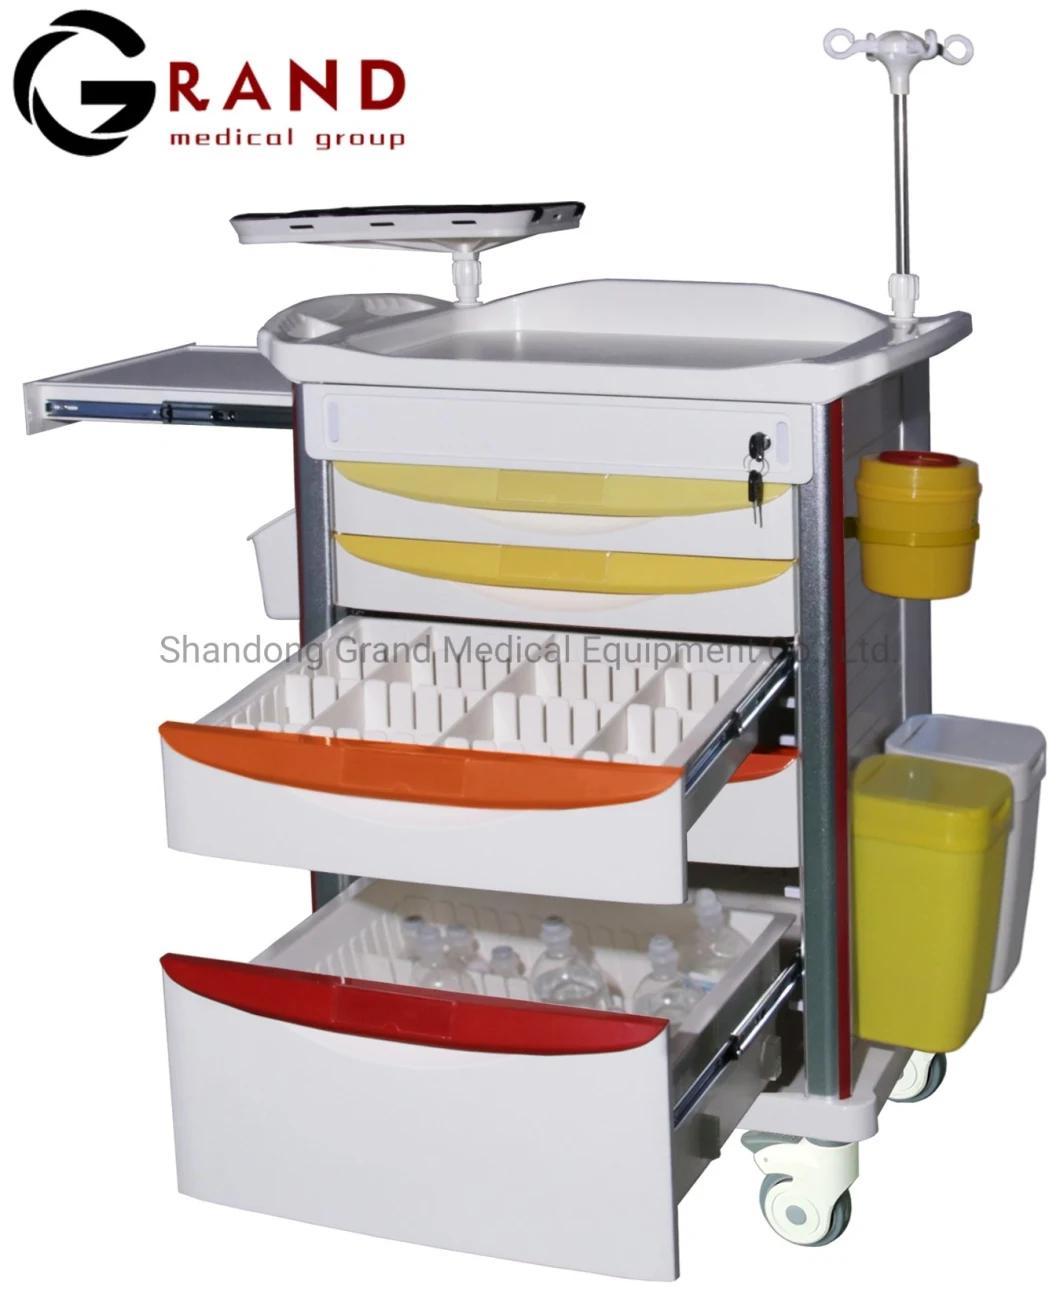 Buy modern Design China Factory in Stock Price Mobile Hospital Trolley Medical Emergency Cart ABS Material with Casters Hospital Furniture